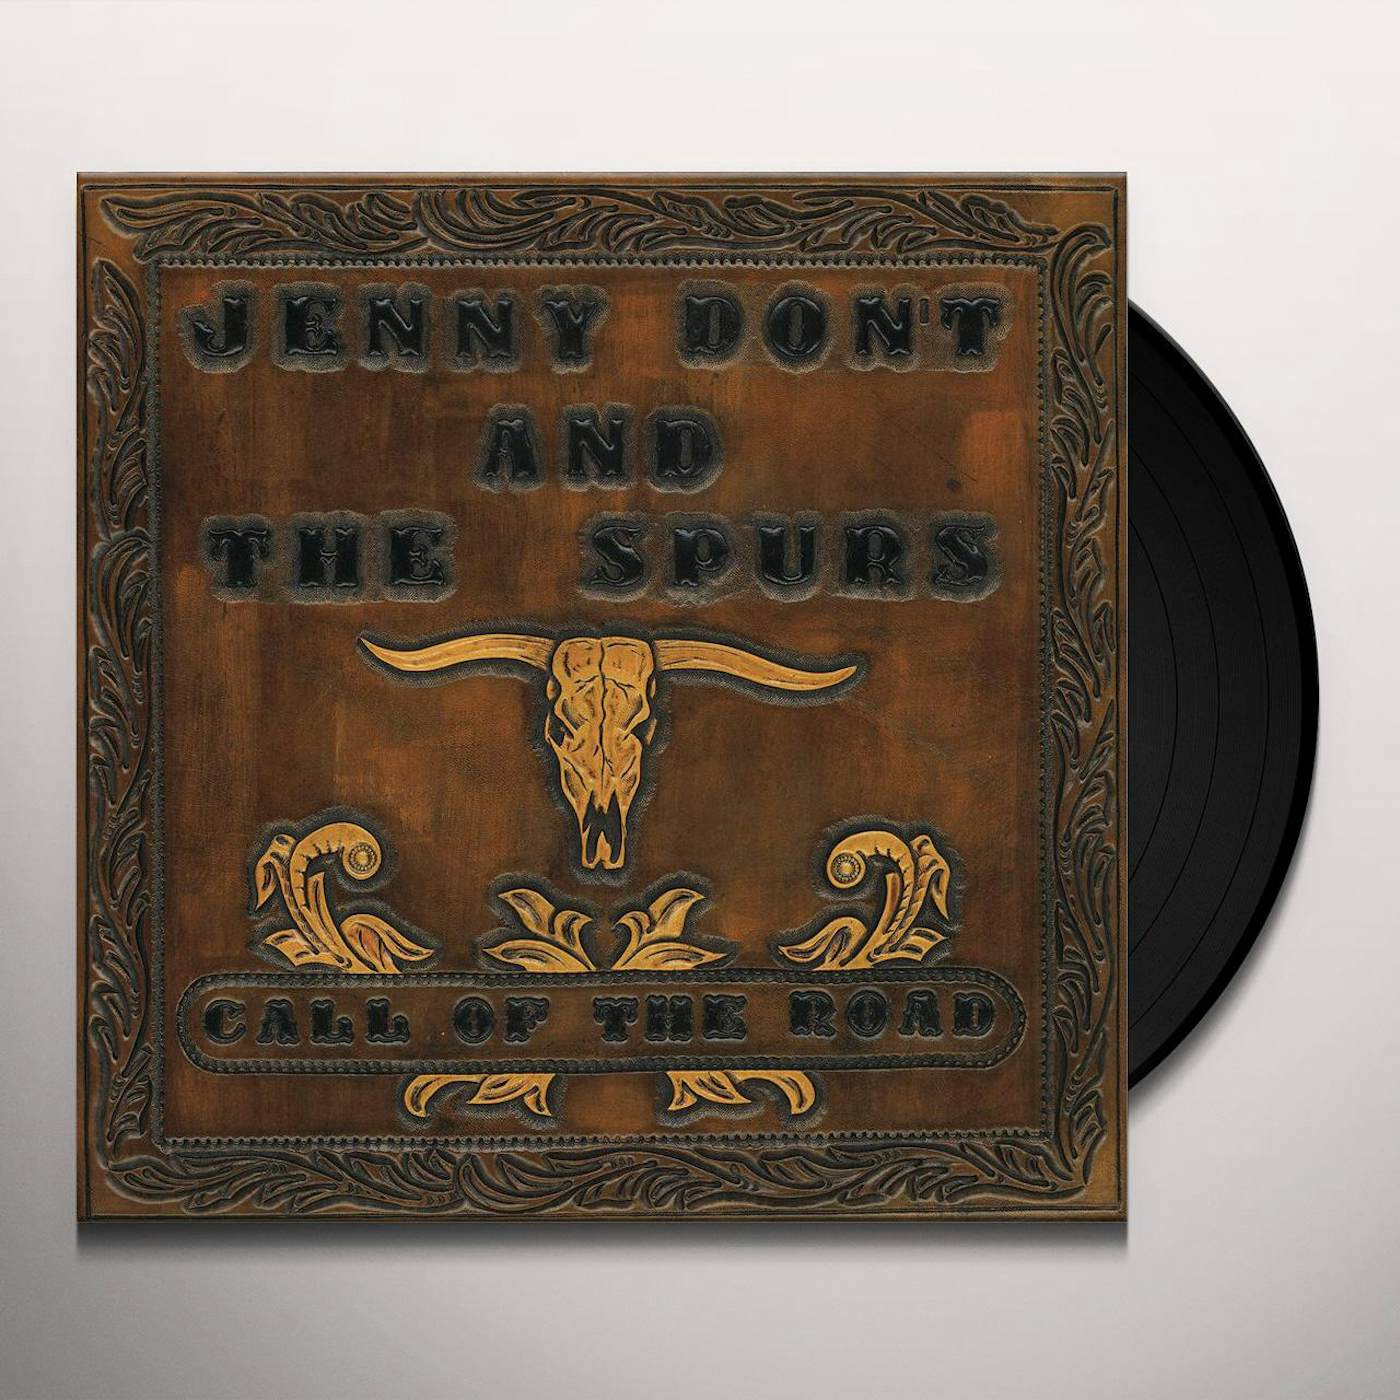 Jenny Don't And The Spurs Call of the Road Vinyl Record